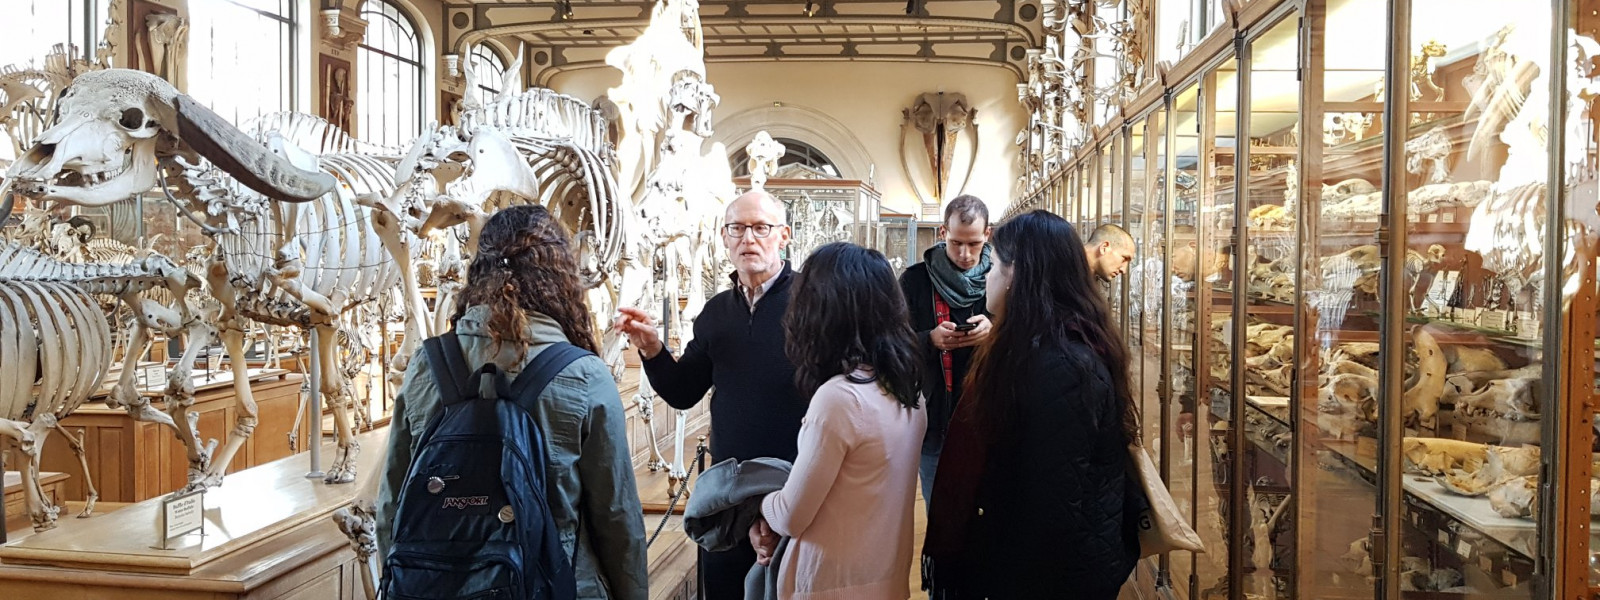 A few students stand listening to the professor lecture by an exhibit of animal skeletons.